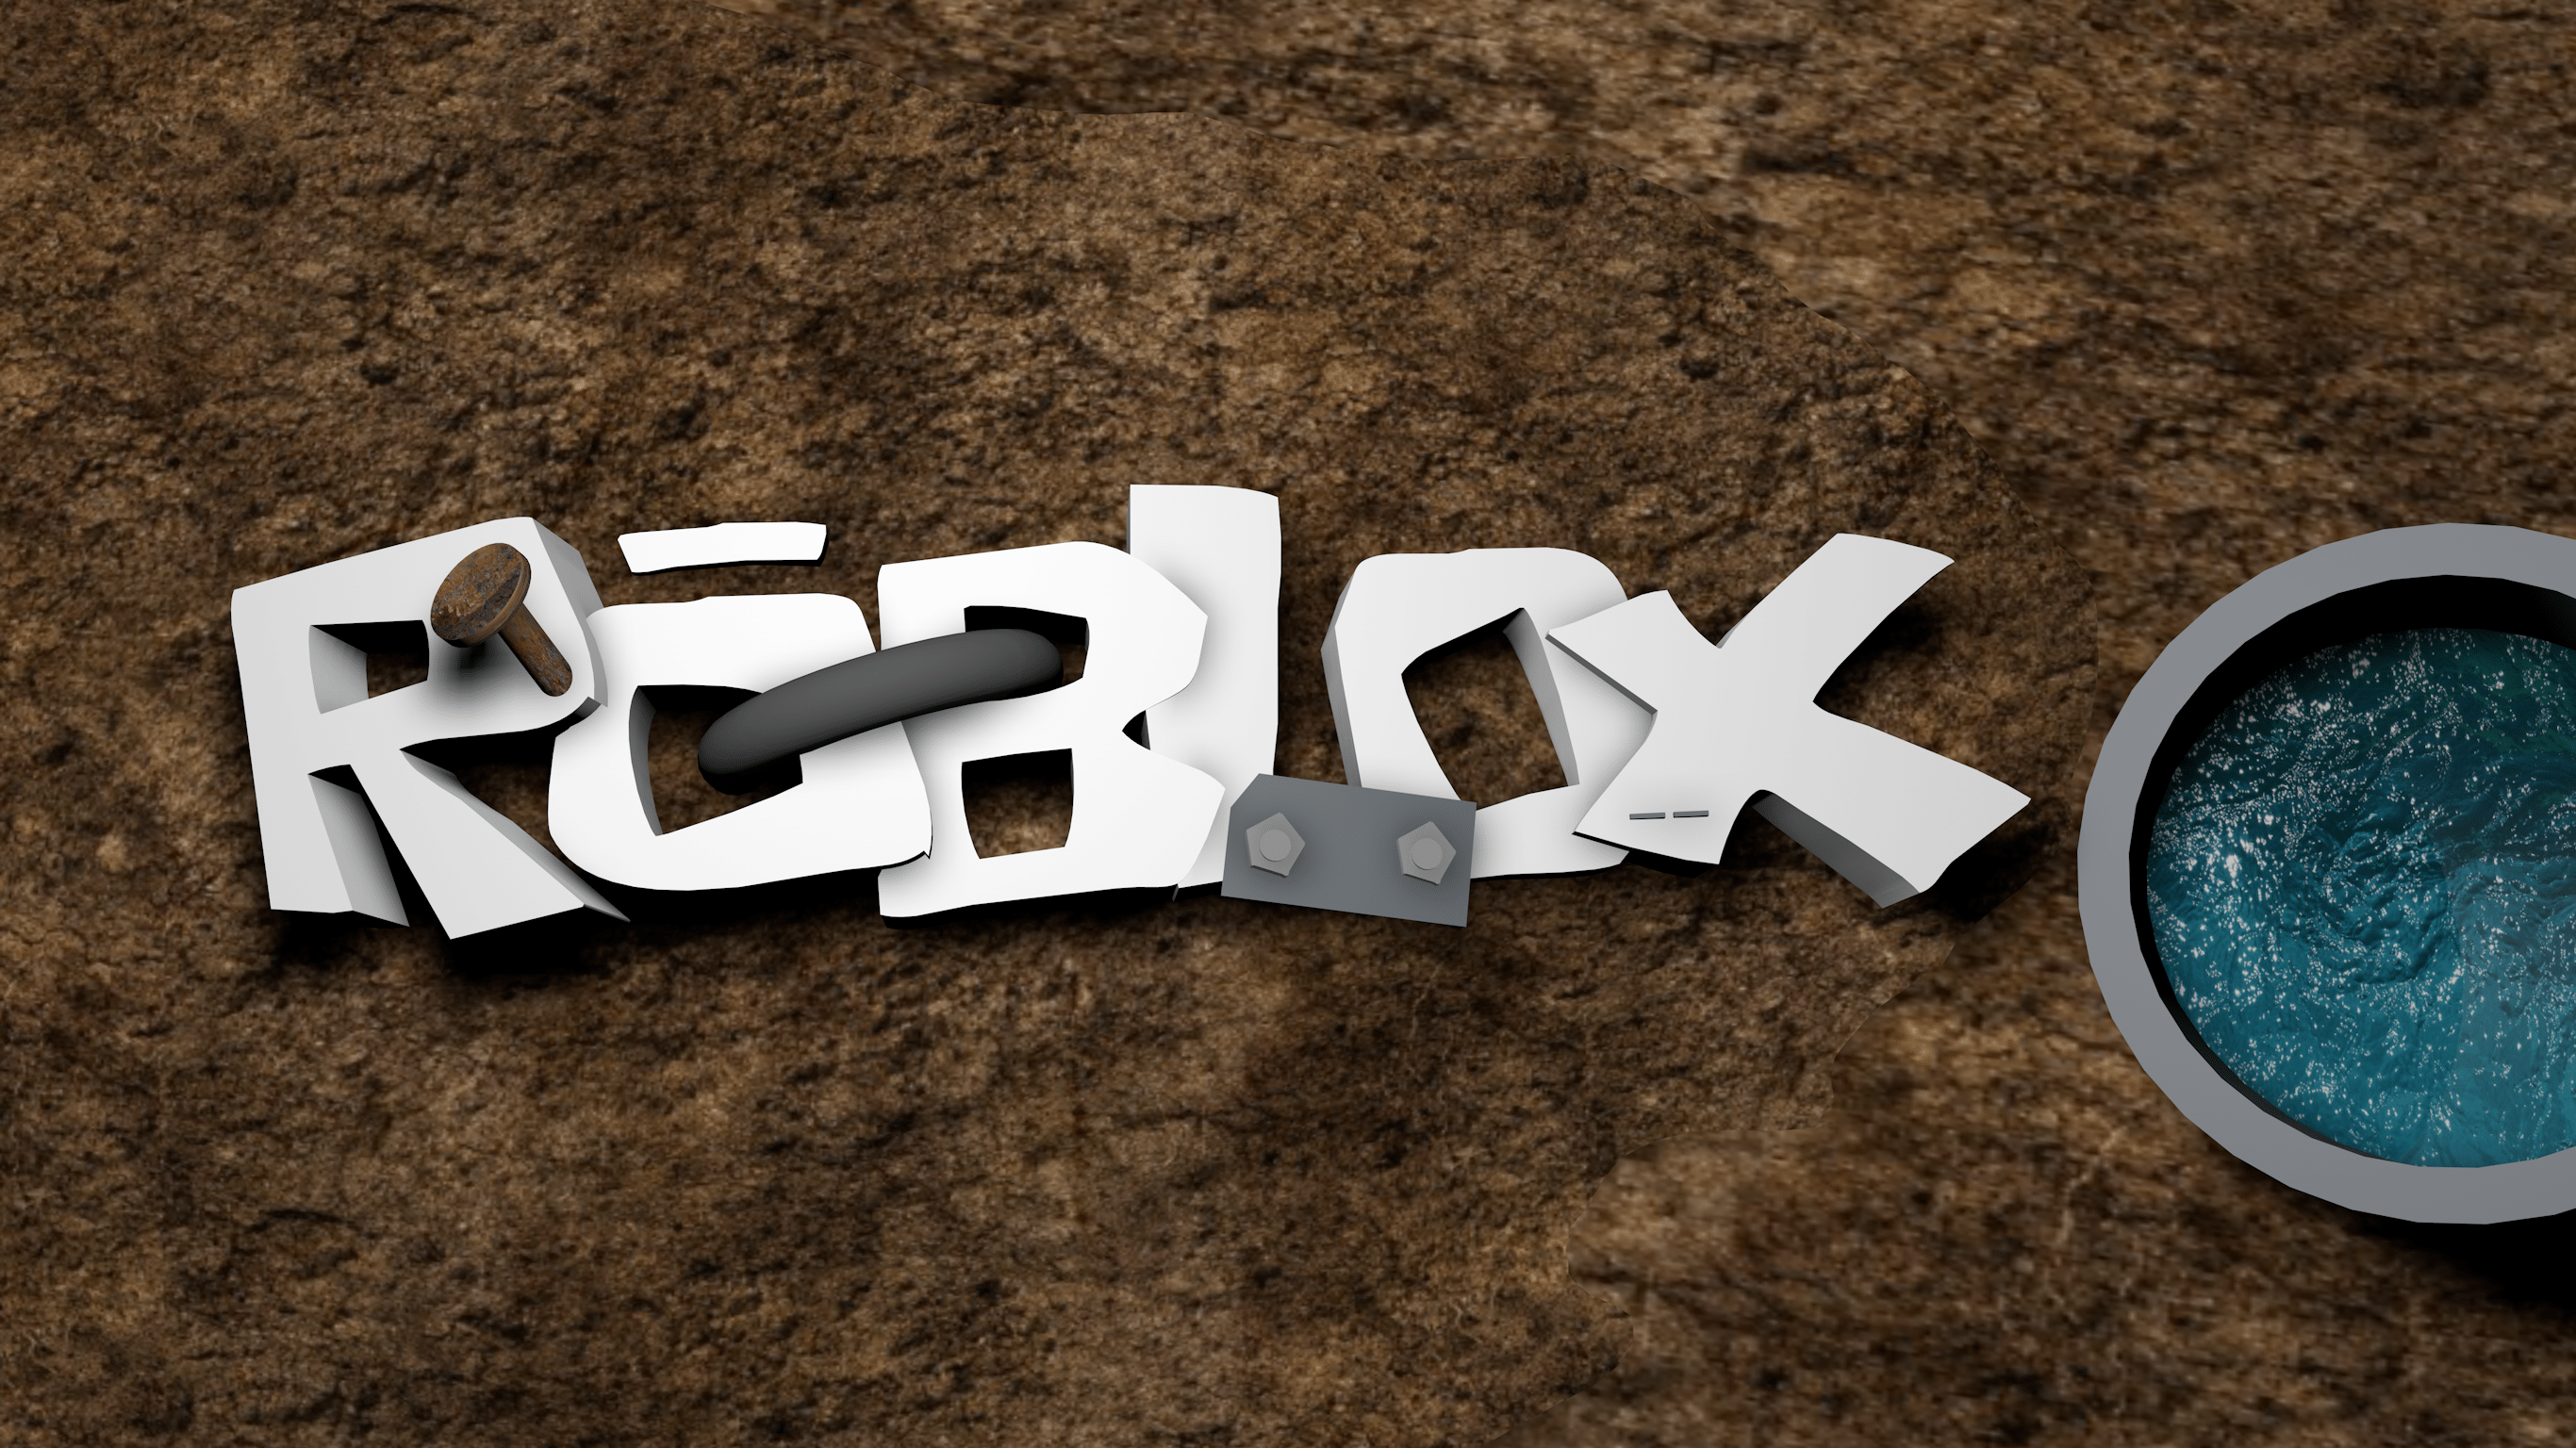 Roblox Computer Wallpapers Top Free Roblox Computer Backgrounds - roblox gfx wallpaper arsenal roblox background